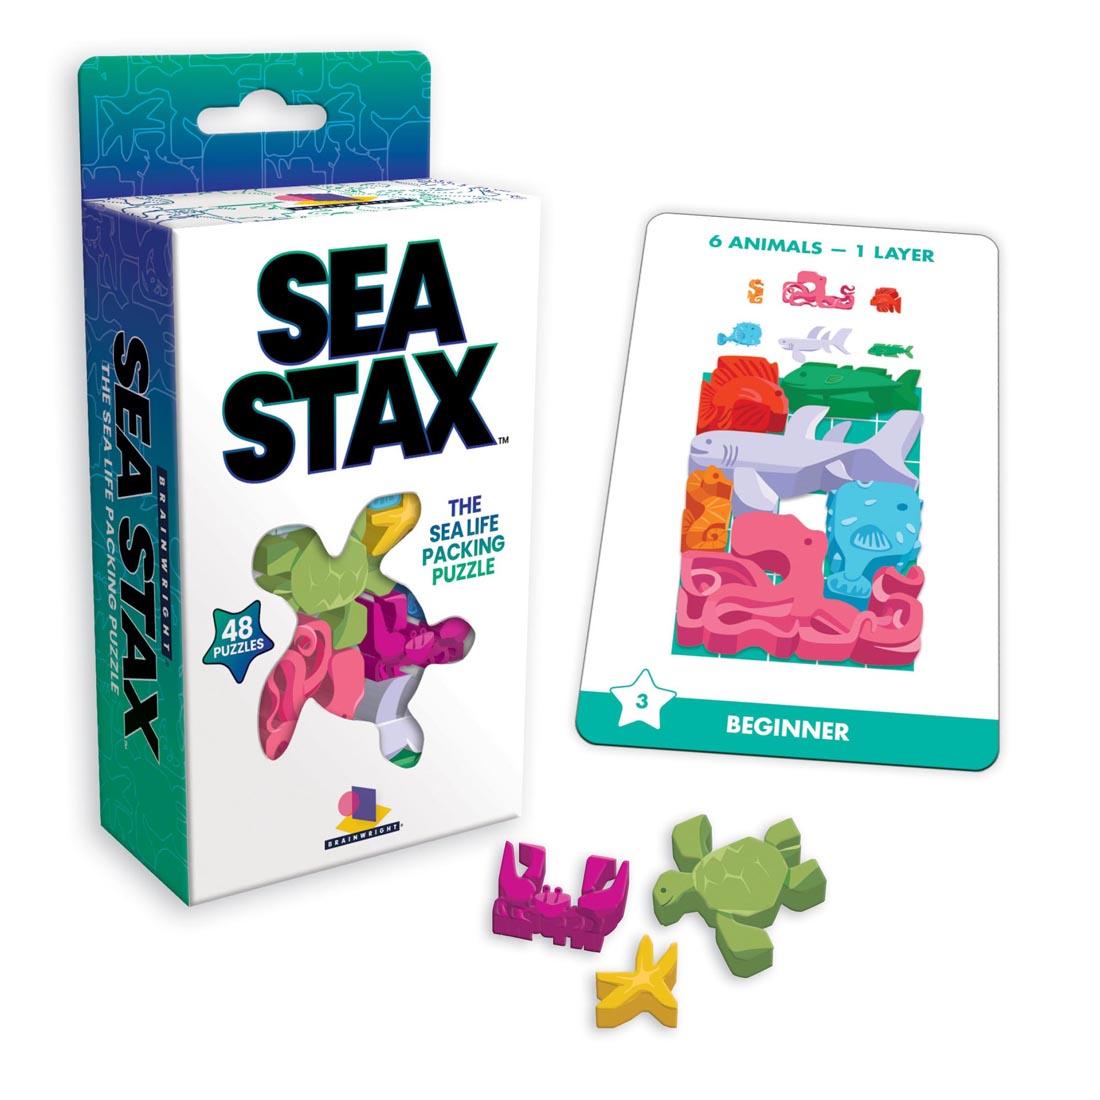 Sea Stax Puzzle Game package beside a challenge card example and three pieces